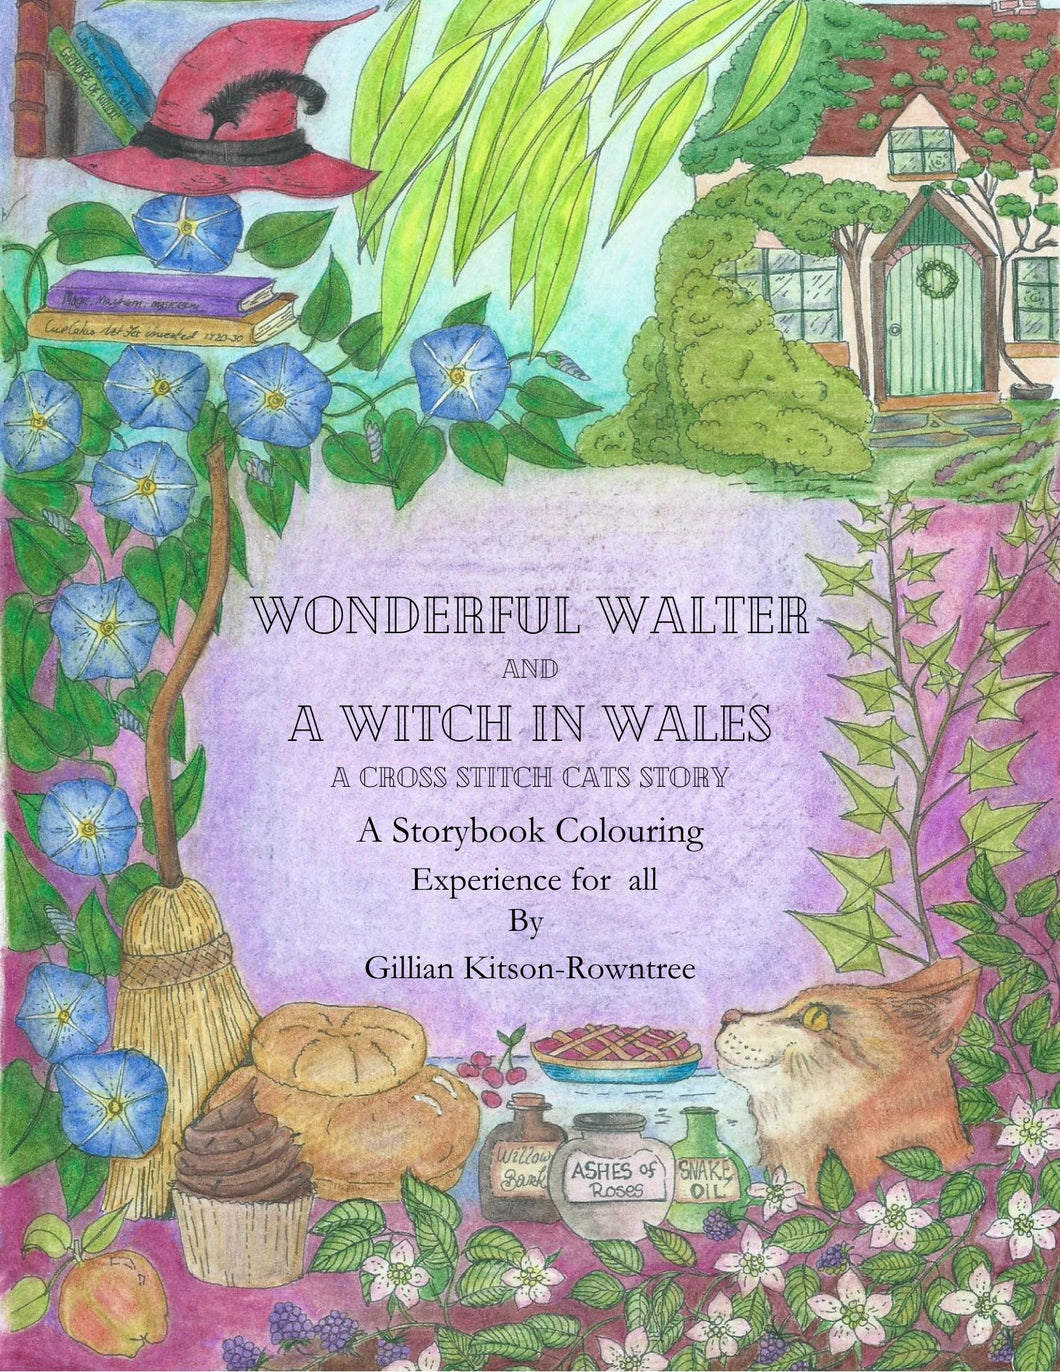 Wonderful Walter and a Witch in Wales: A Cross-Stitch Cats colouring, story book, colouring book